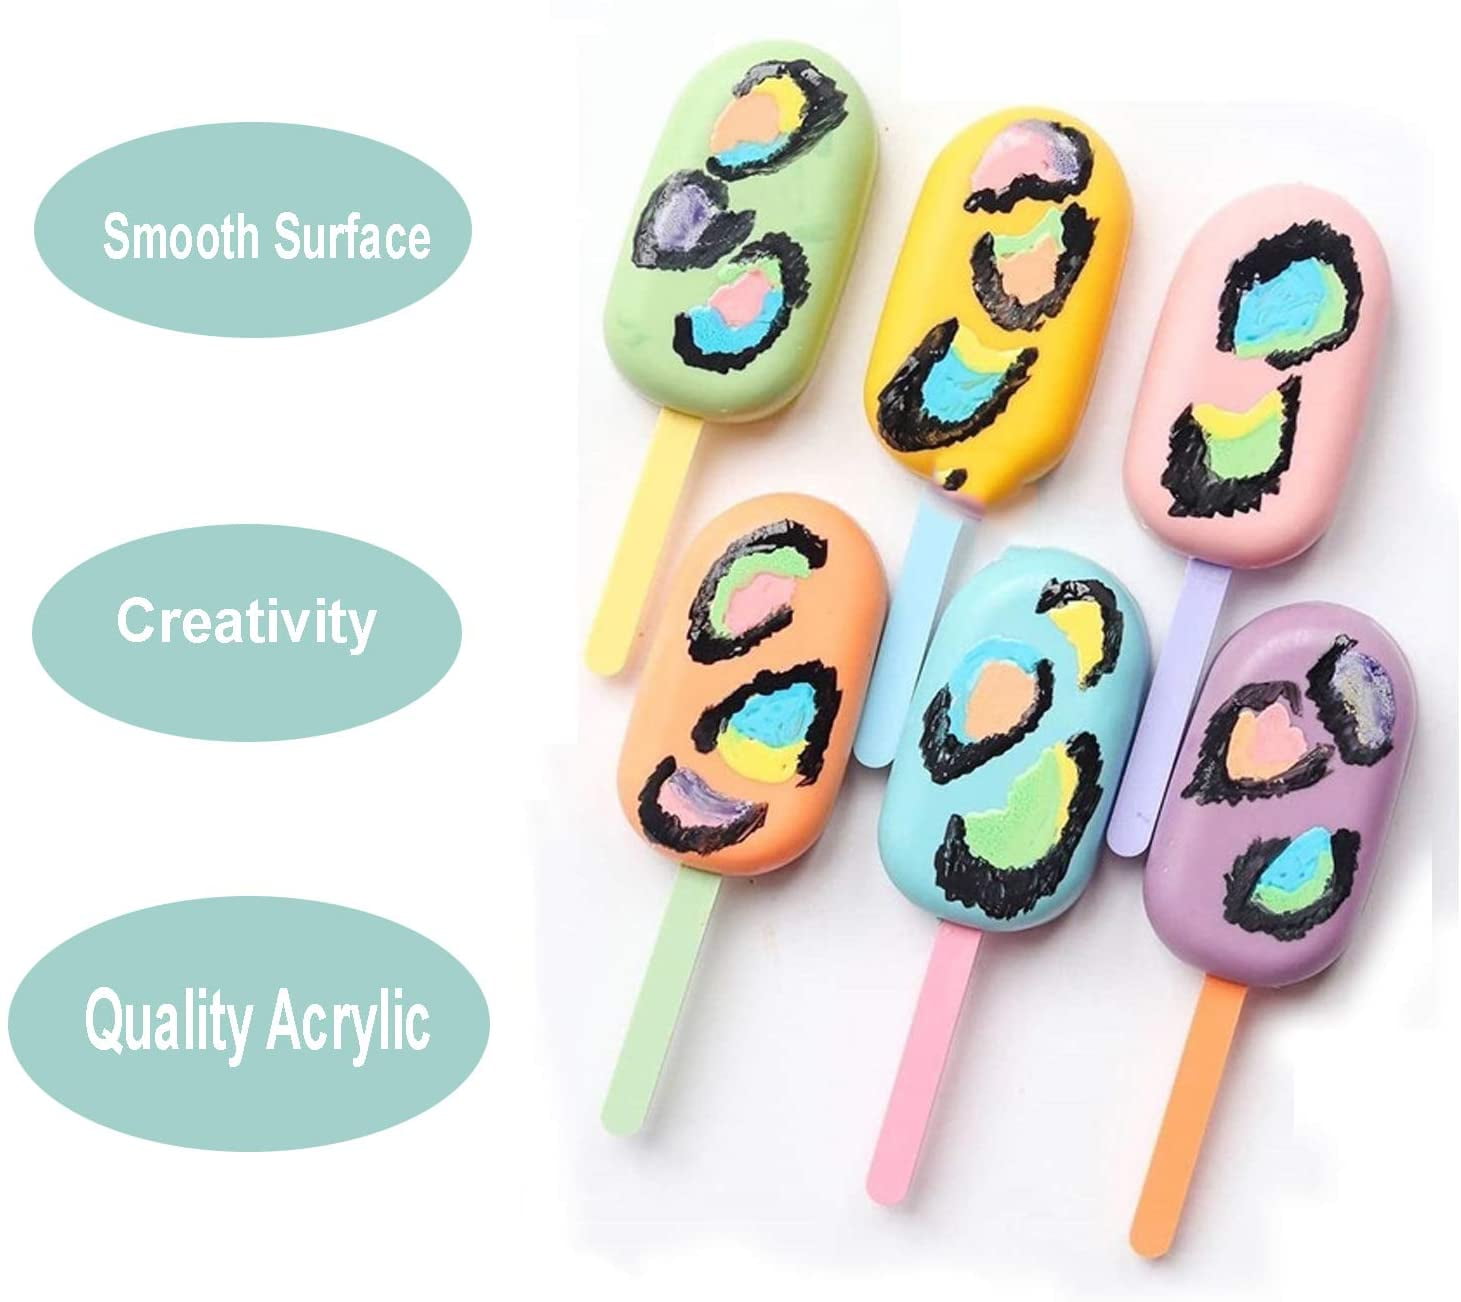 50 Pcs Mini Reusable Acrylic Cakesicle Popsicle Sticks, Small Size Mirror  Stick for Ice Creamsicle Candy Apple (Mirror Gold)